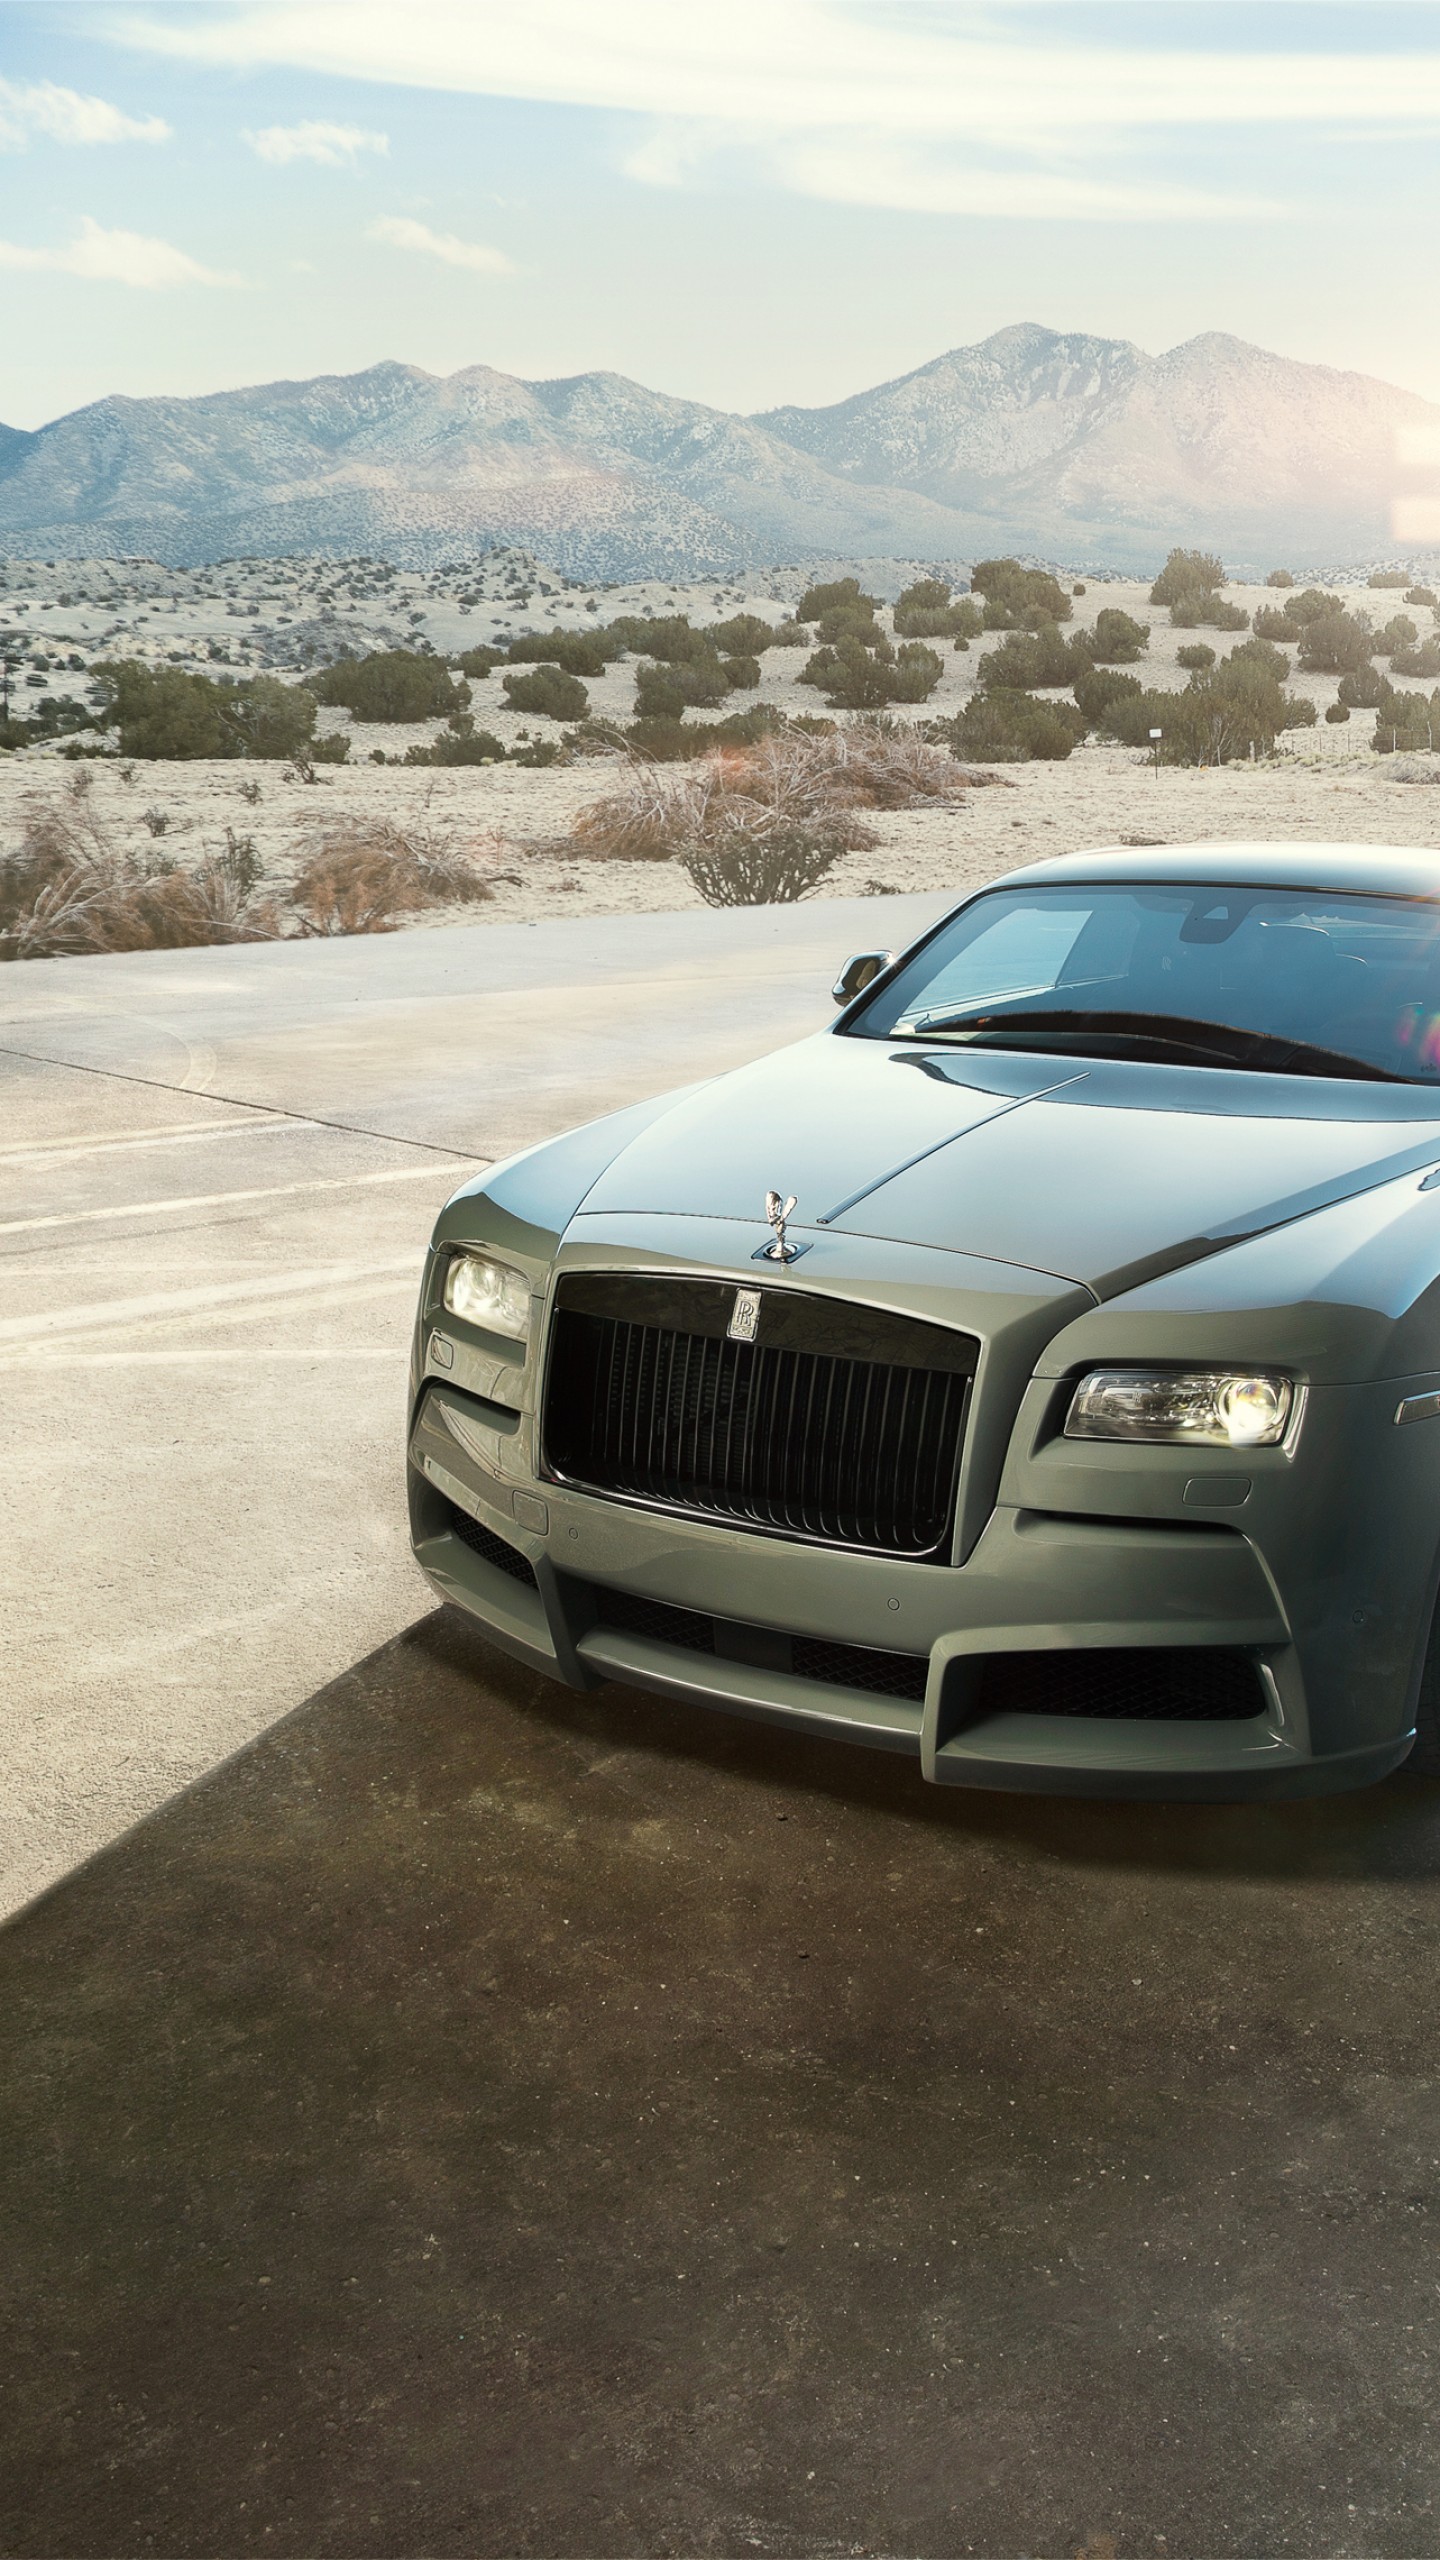 Download wallpaper 840x1160 blue rollsroyce wraith luxury car iphone 4  iphone 4s ipod touch 840x1160 hd background 20968